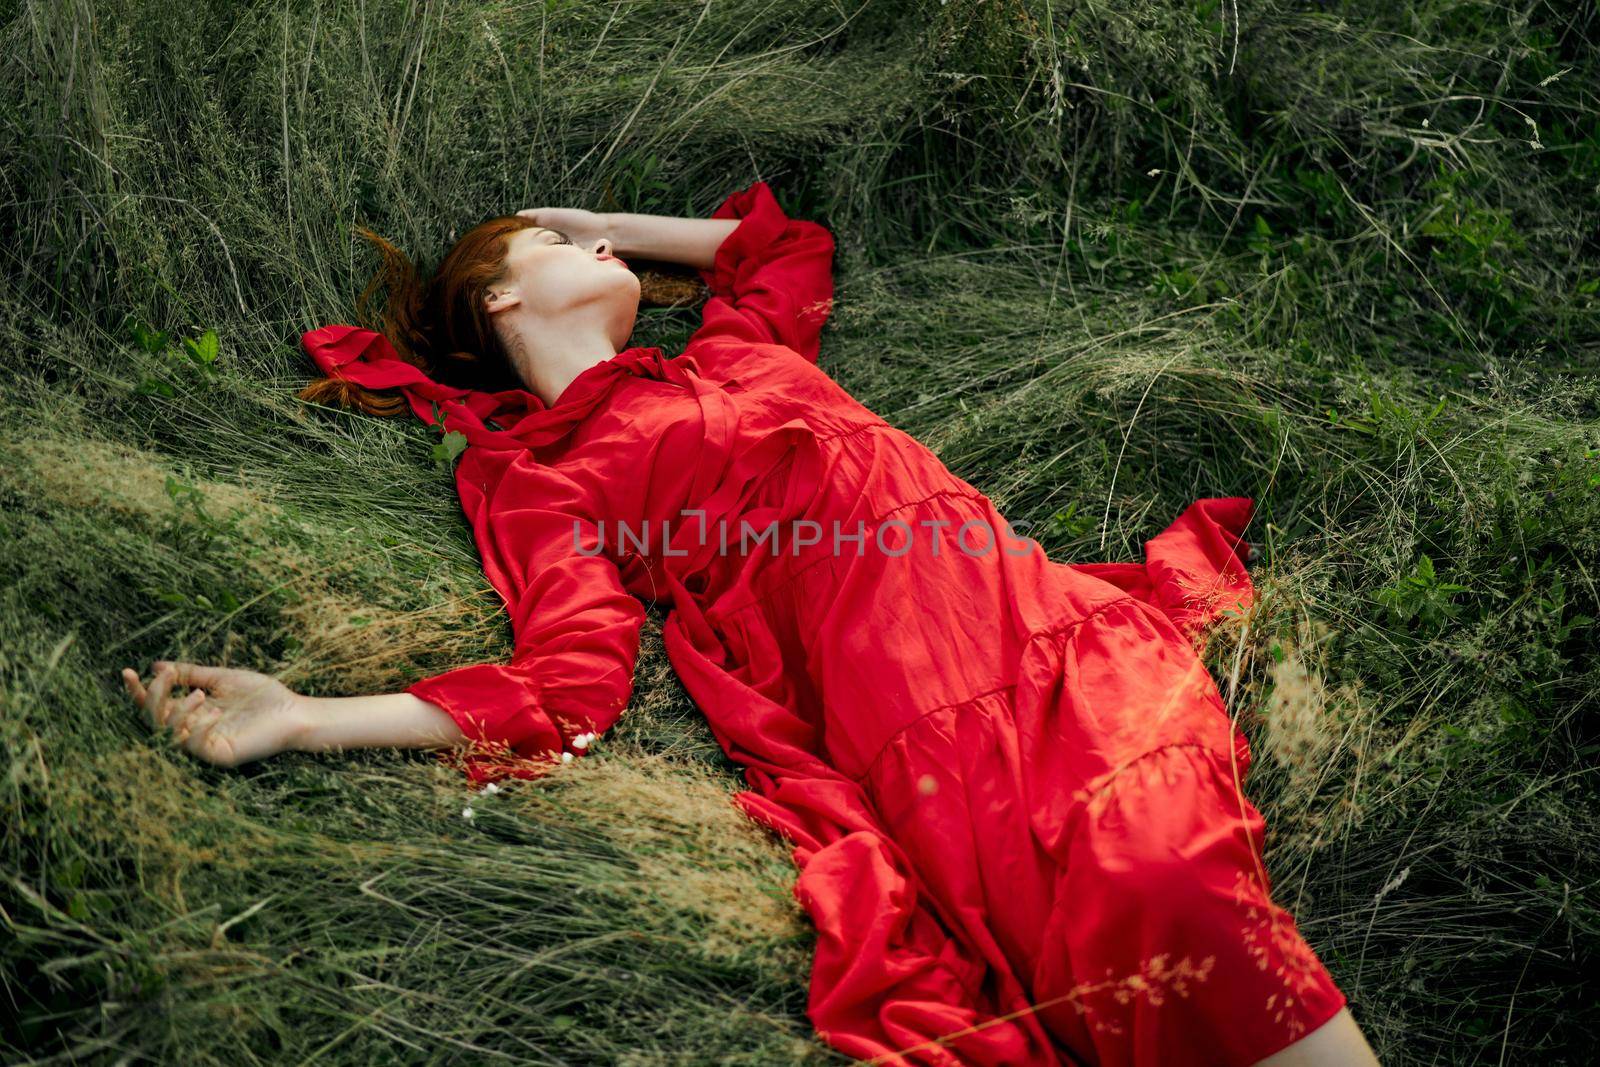 woman in red dress lies on the grass in the field nature landscape. High quality photo